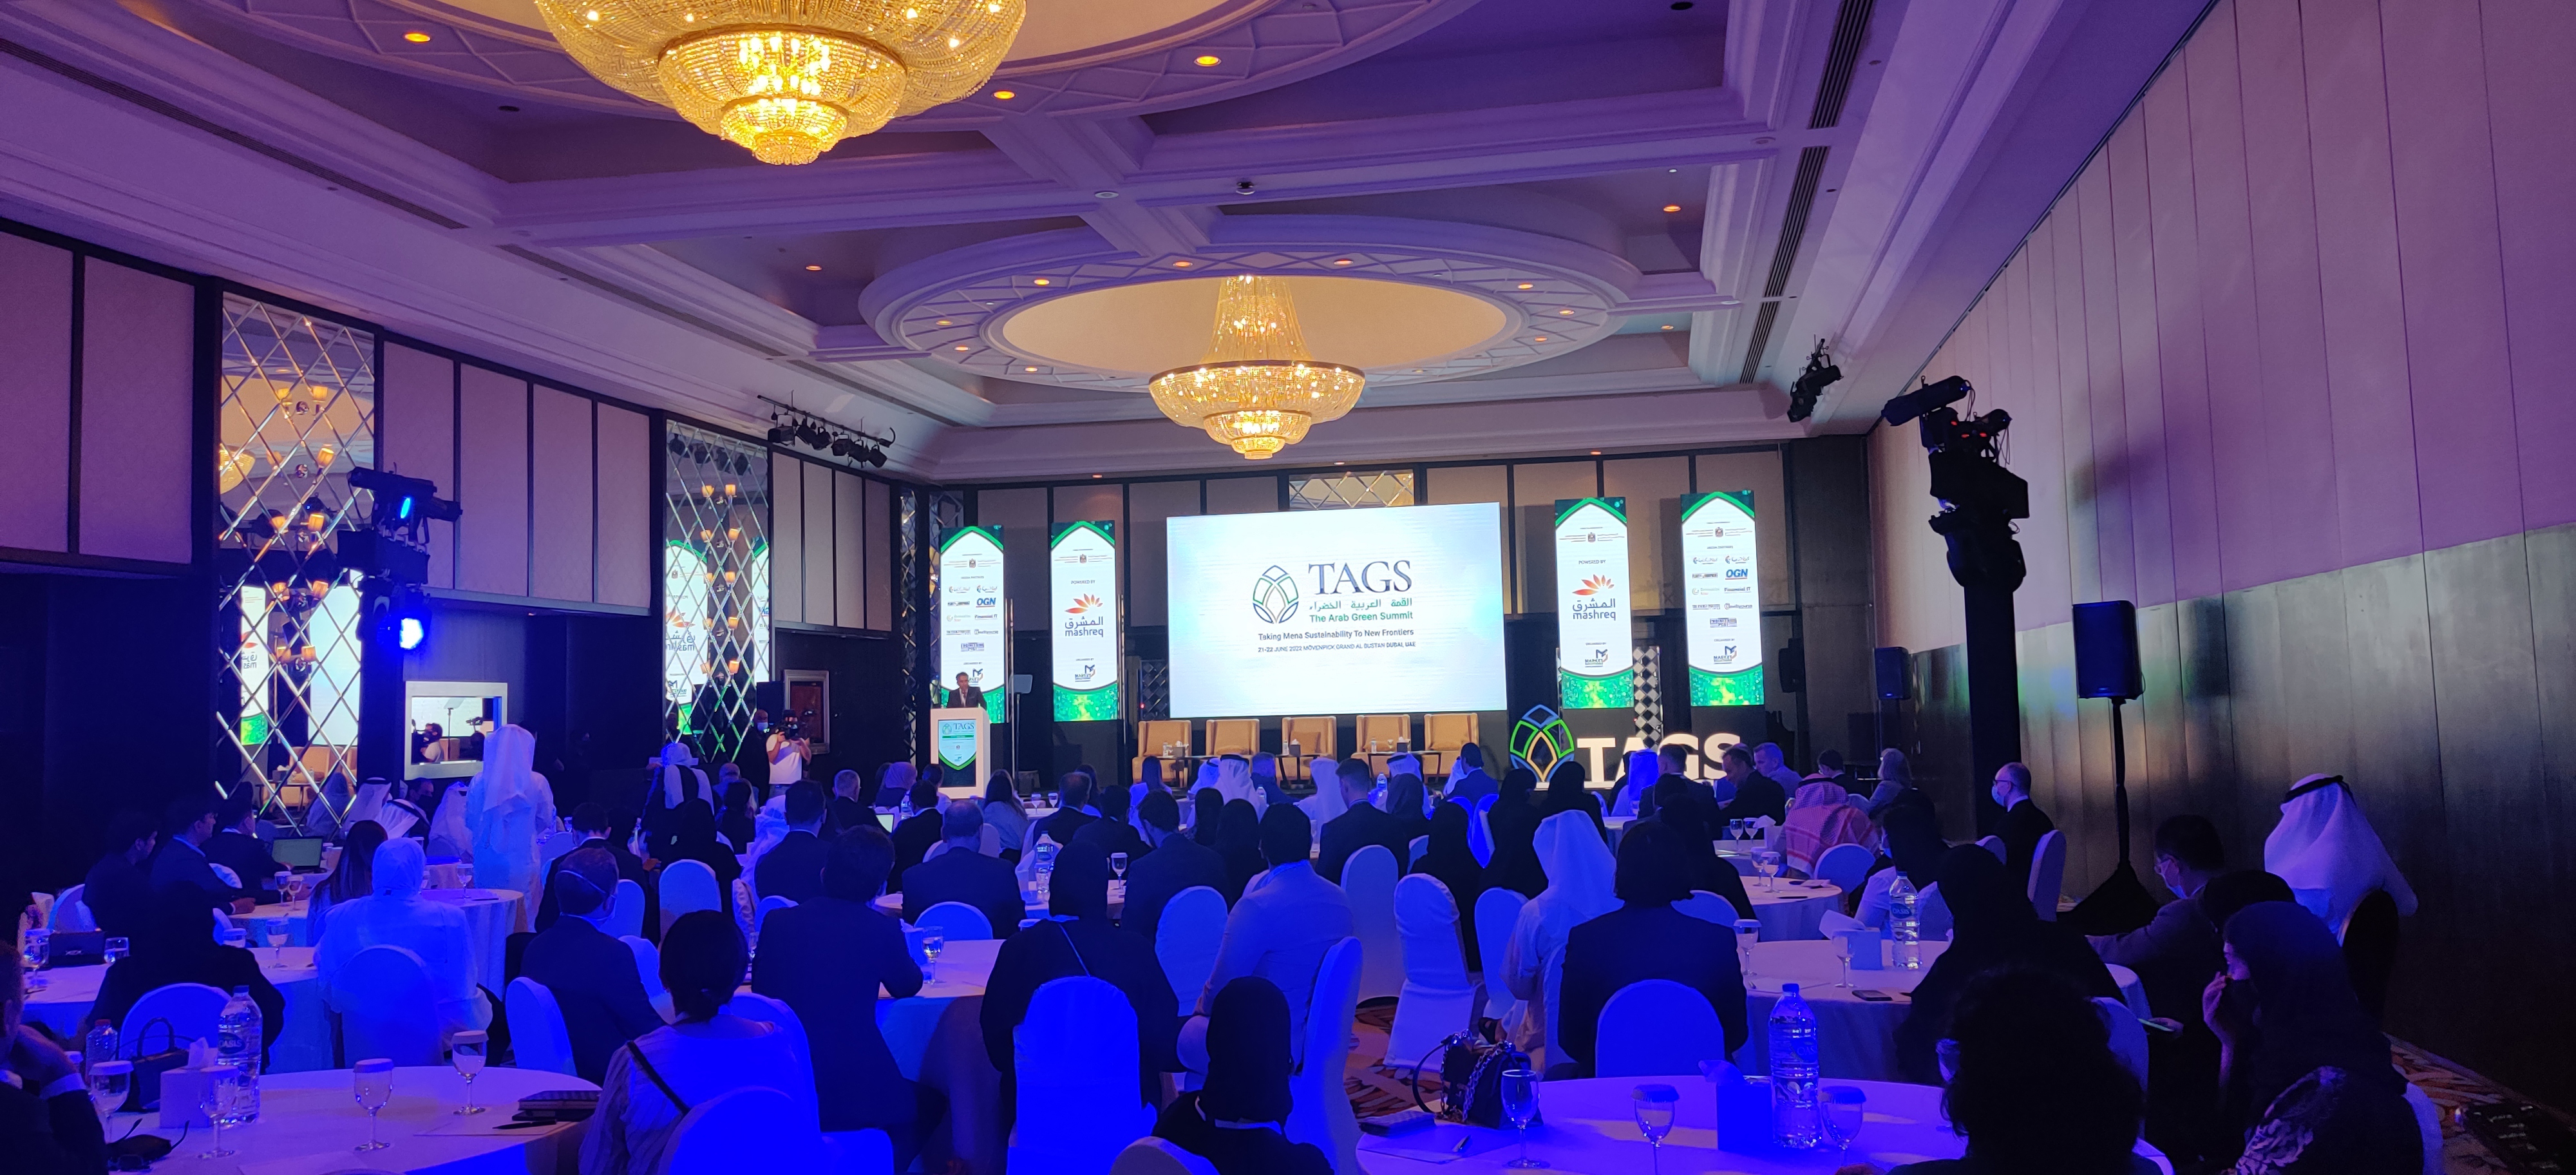 Climate Change, Decarbonization and Energy Transition were the Key Focus Points of The Arab Green Summit (TAGS)